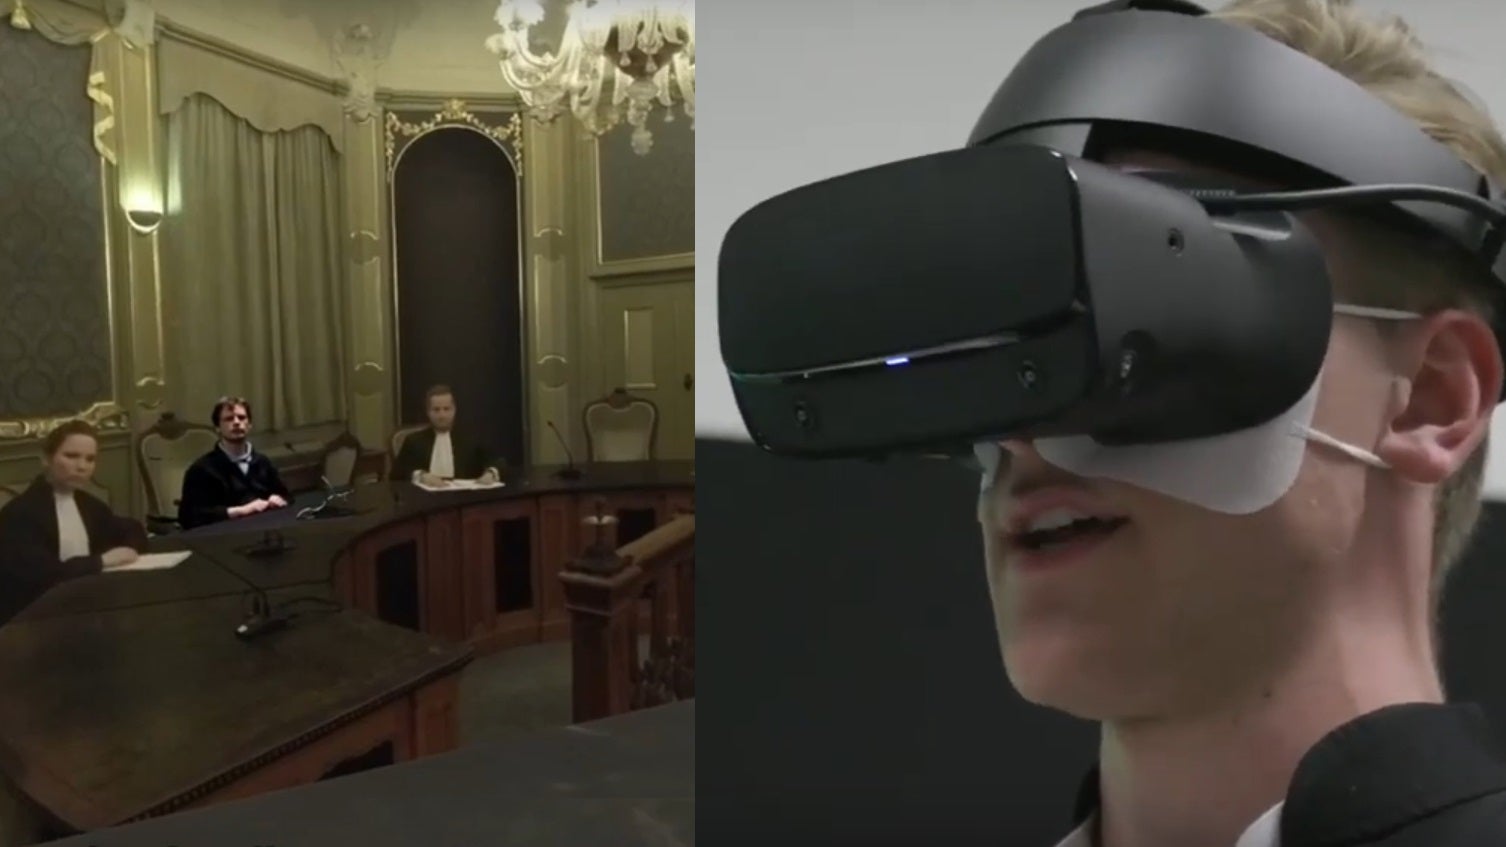 A law student wearing VR goggles sees a courtroom with three employees, two in togas